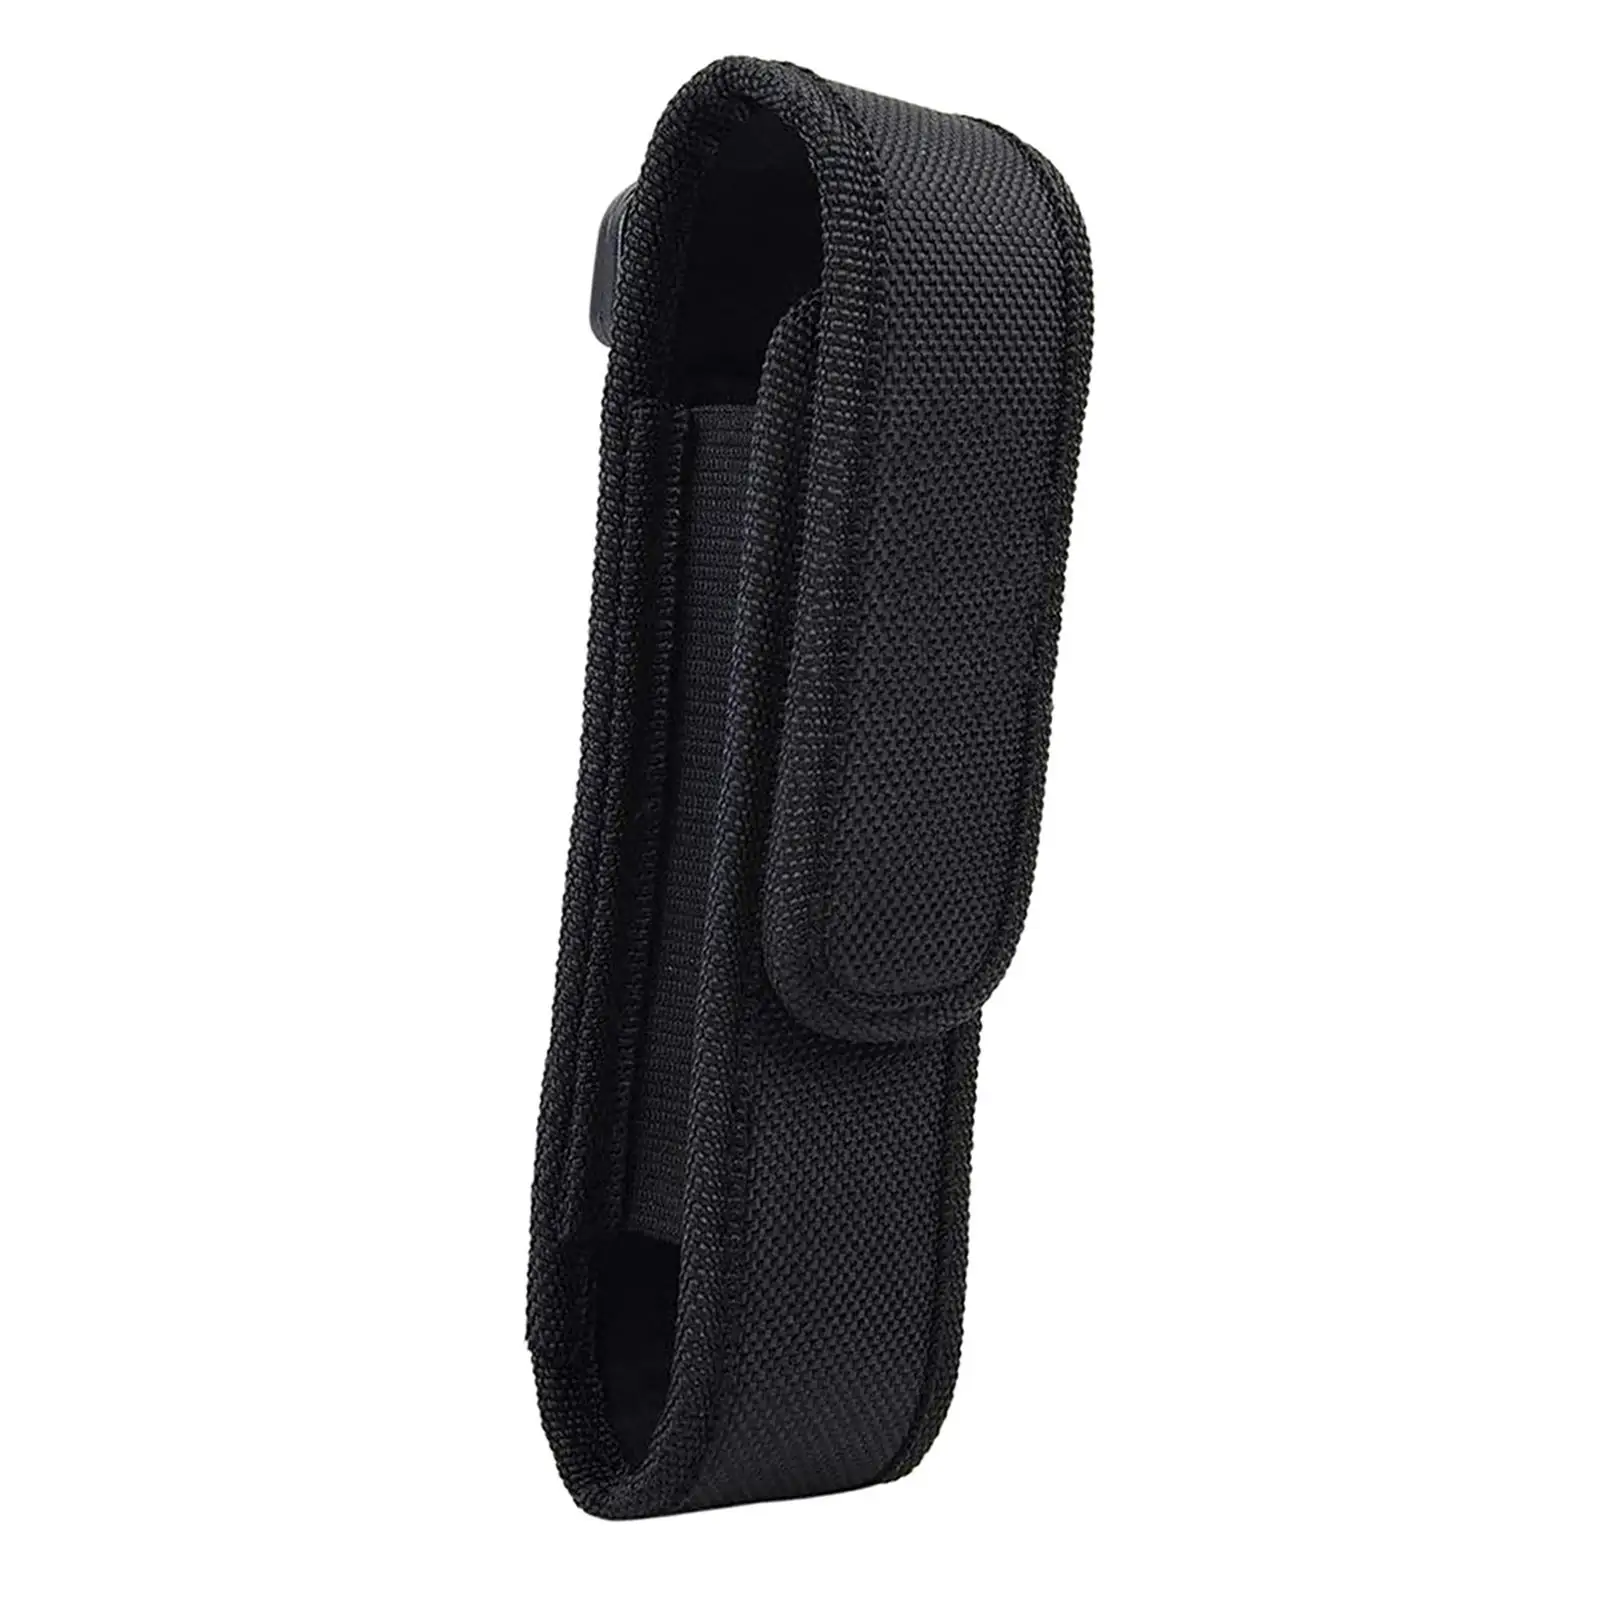 Multifunction Flashlight Holster Flashlight Pouch for Cycling Walking Hiking